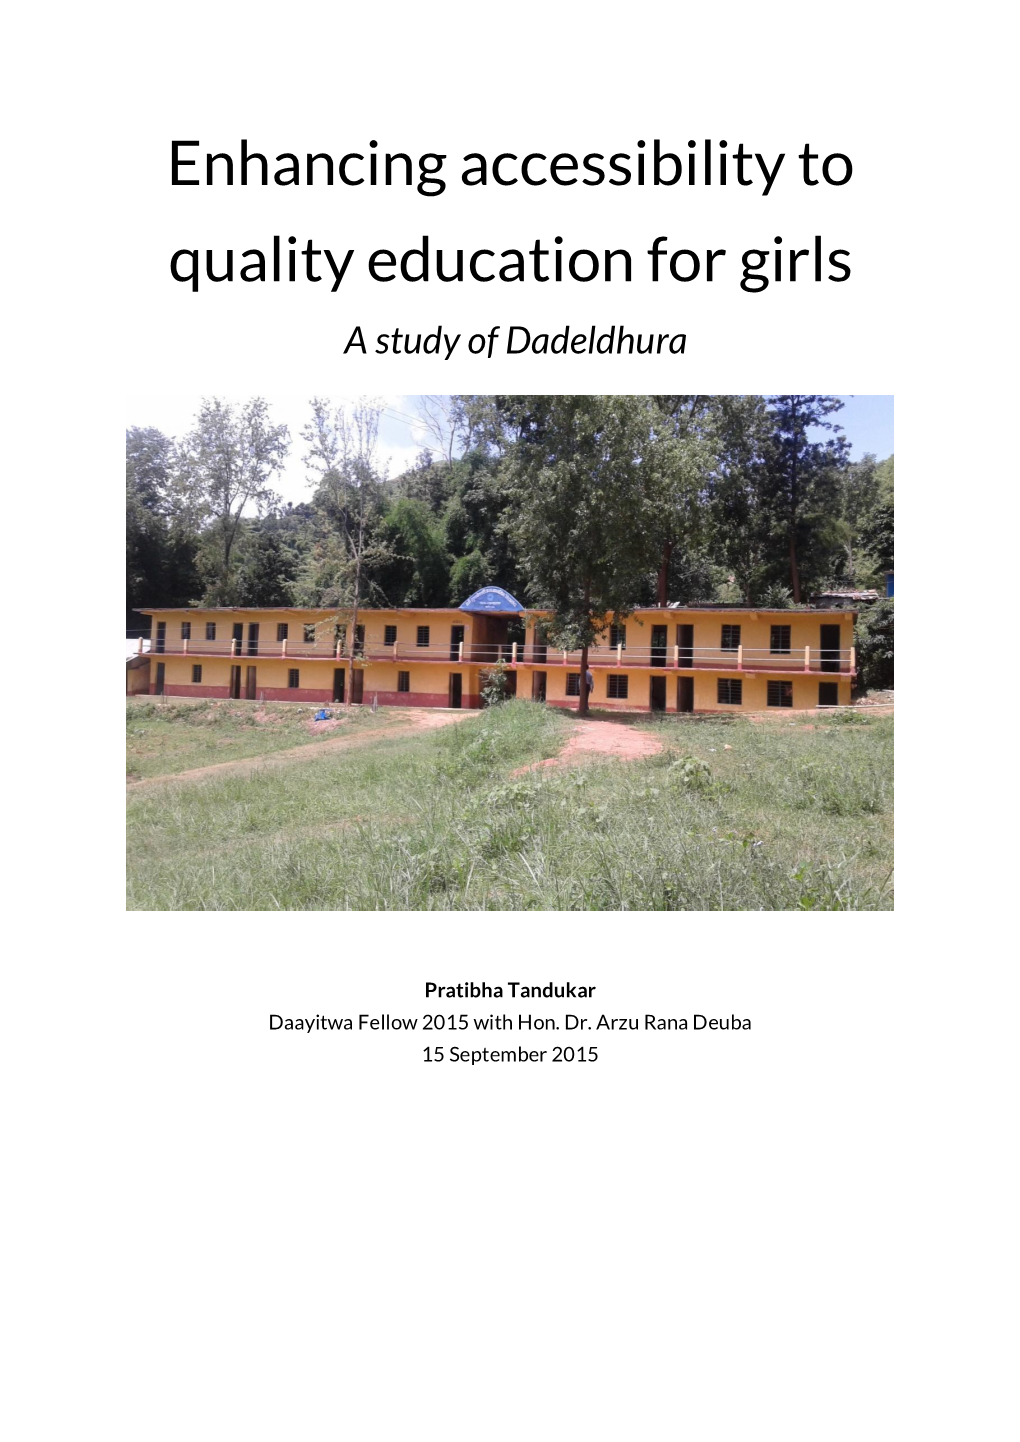 Enhancing Accessibility to Quality Education for Girls a Study of Dadeldhura